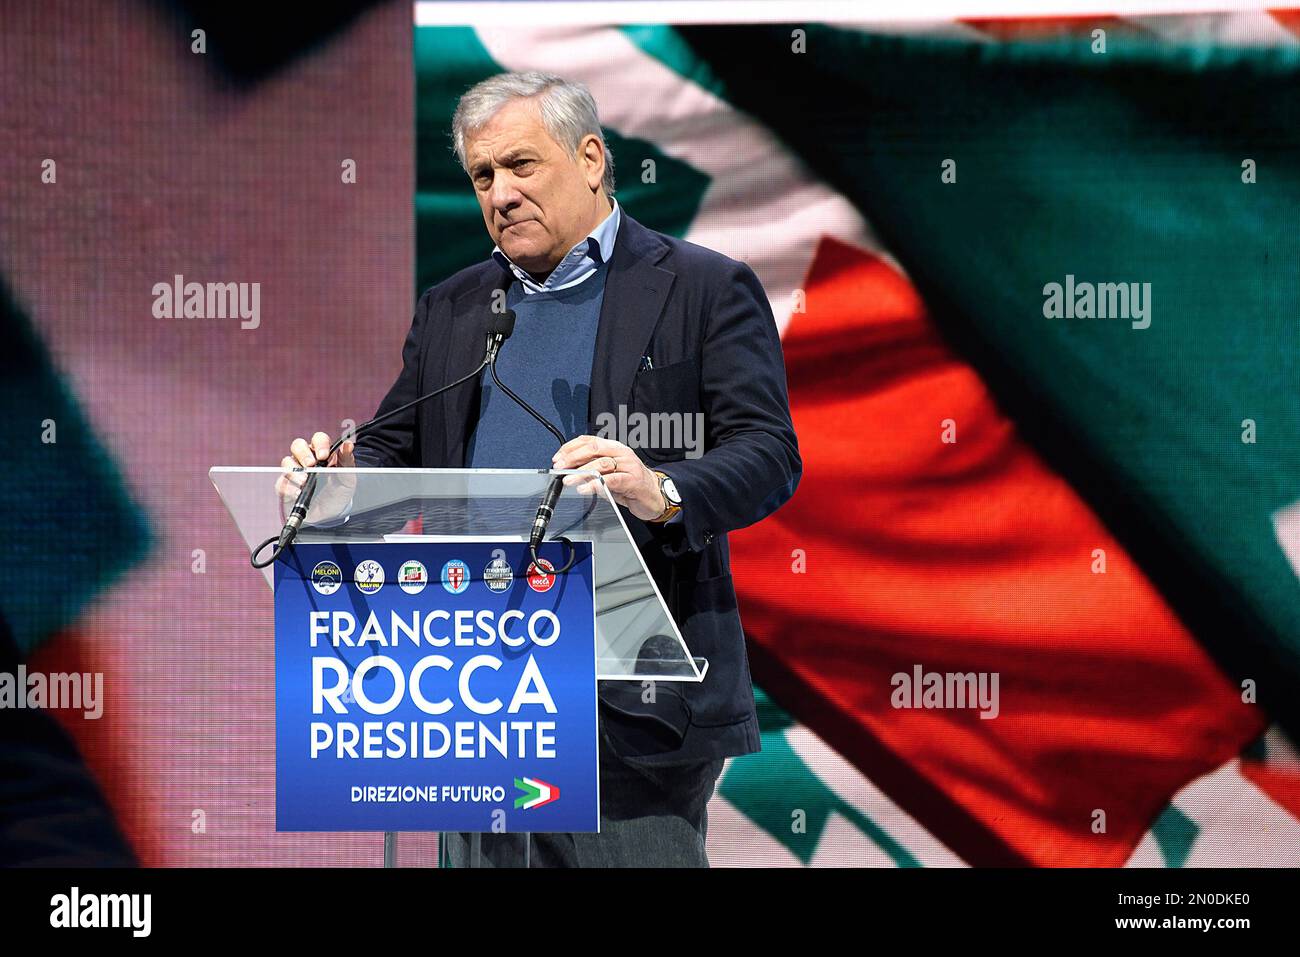 Minister of Foreign Affairs, Antonio Tajani speaks during the event in support of the candidate of the right-wing coalition for the presidency of the Lazio Region, Francesco Rocca. On 12 and 13 February 2023 we vote to elect the President of the Lazio Region and the Regional Council. Stock Photo